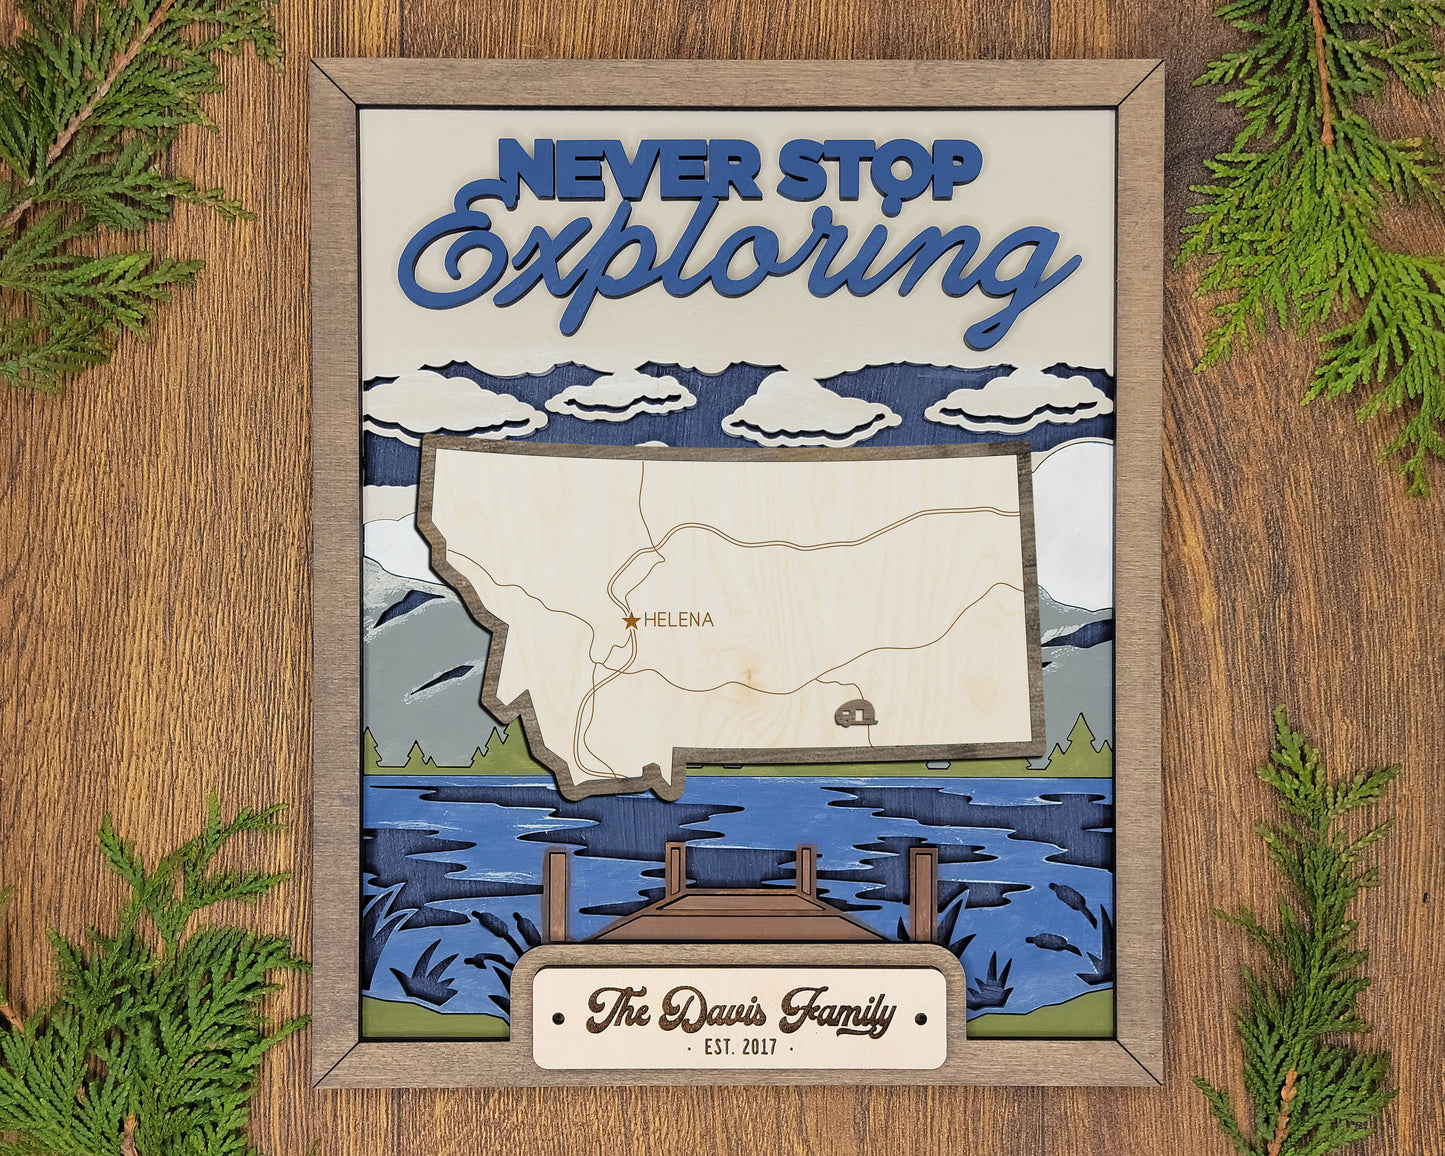 The Montana State Frame - 13 text options, 12 backgrounds, 25 icons Included - Make over 7,500 designs - Glowforge & Lightburn Tested